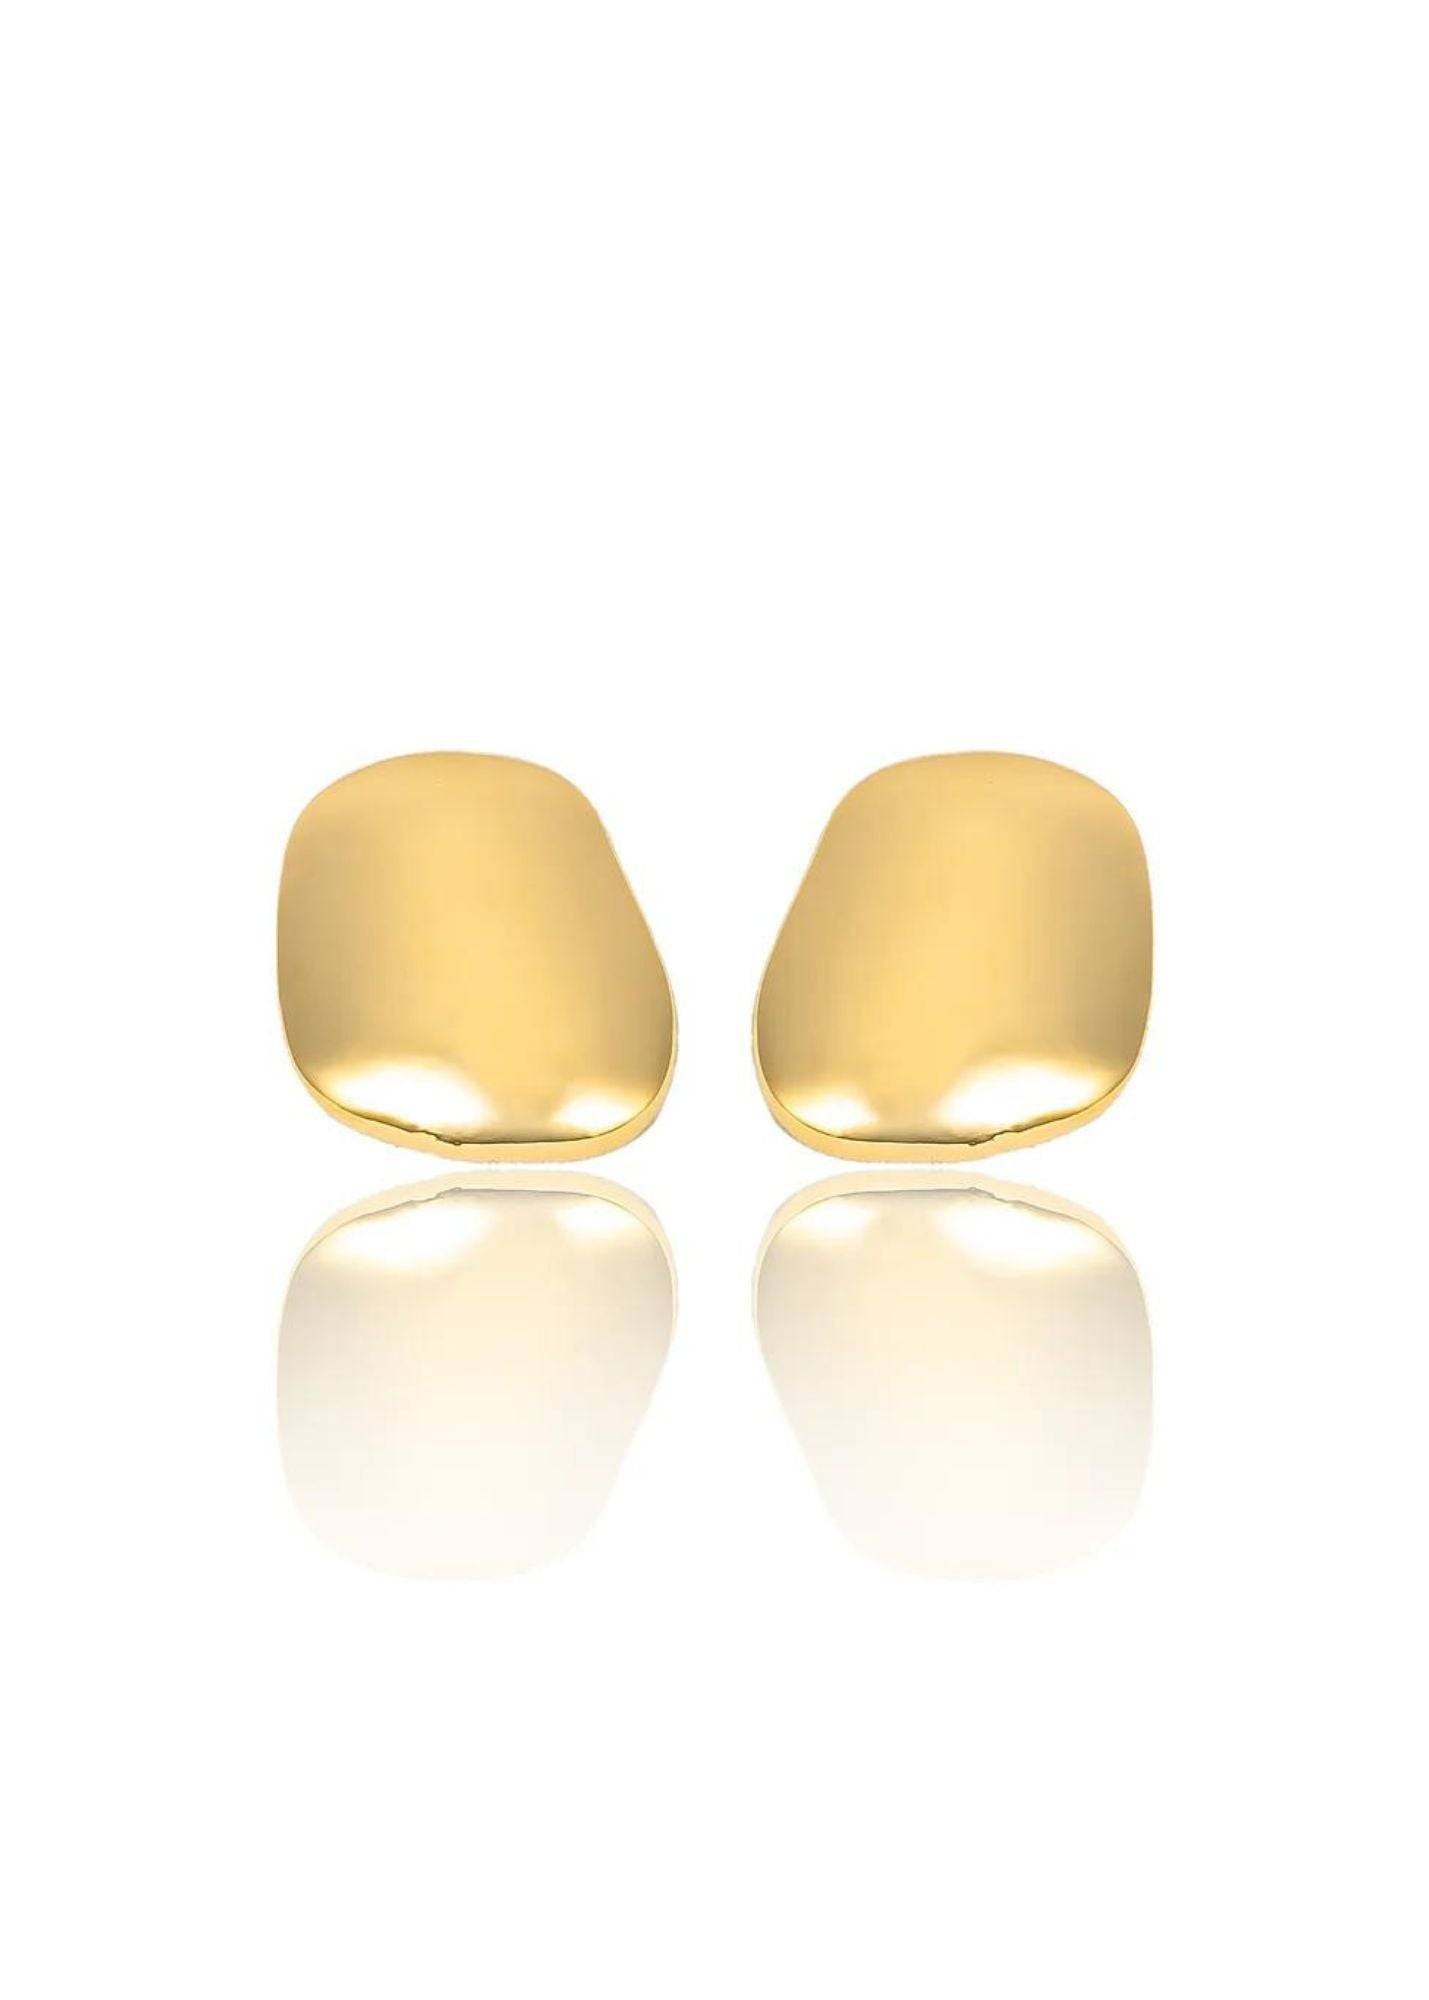 Smooth Flat Plain Square 18K Gold Filled Statement Earrings